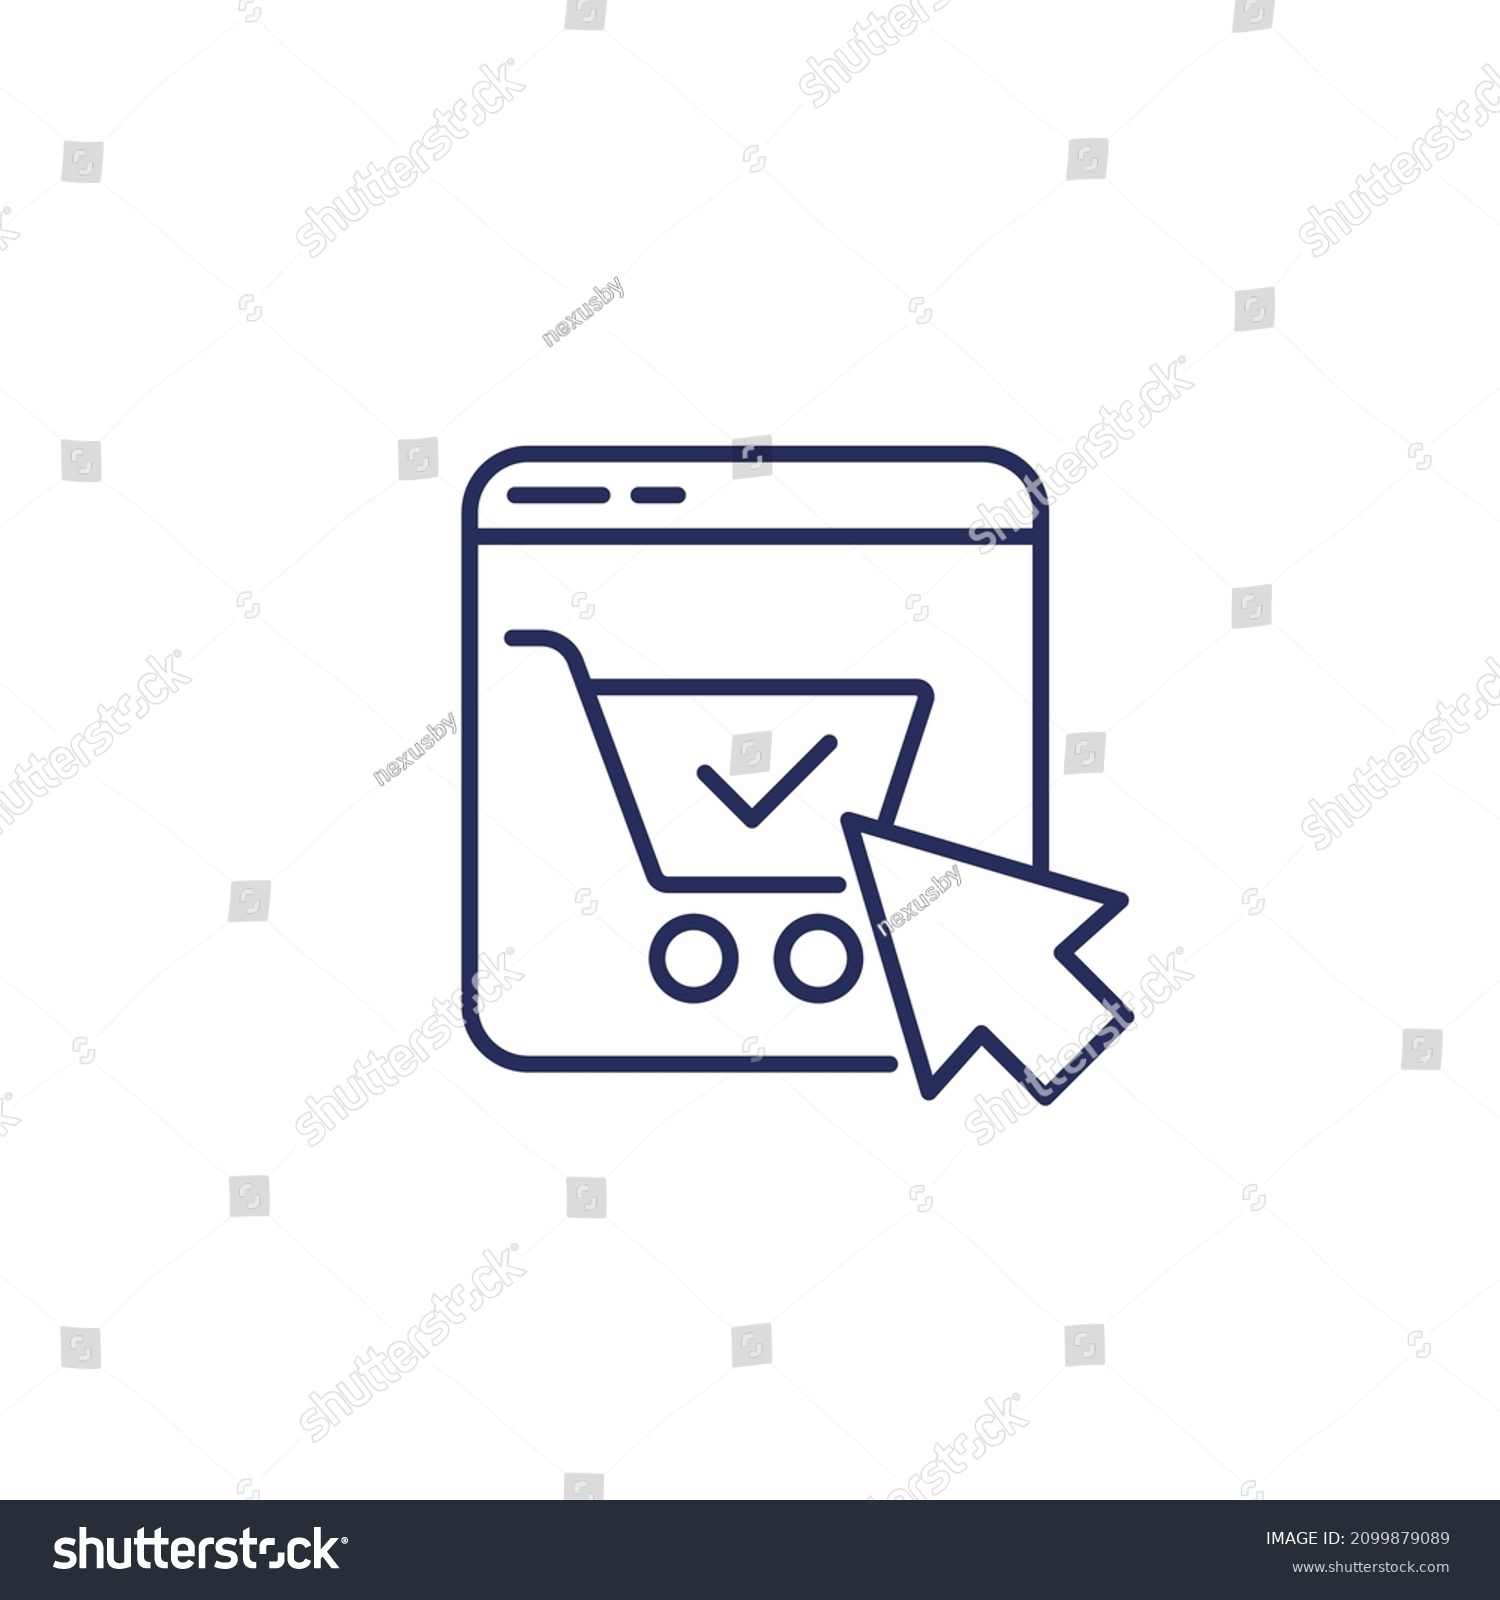 SVG of completed order line icon with shopping cart, vector svg